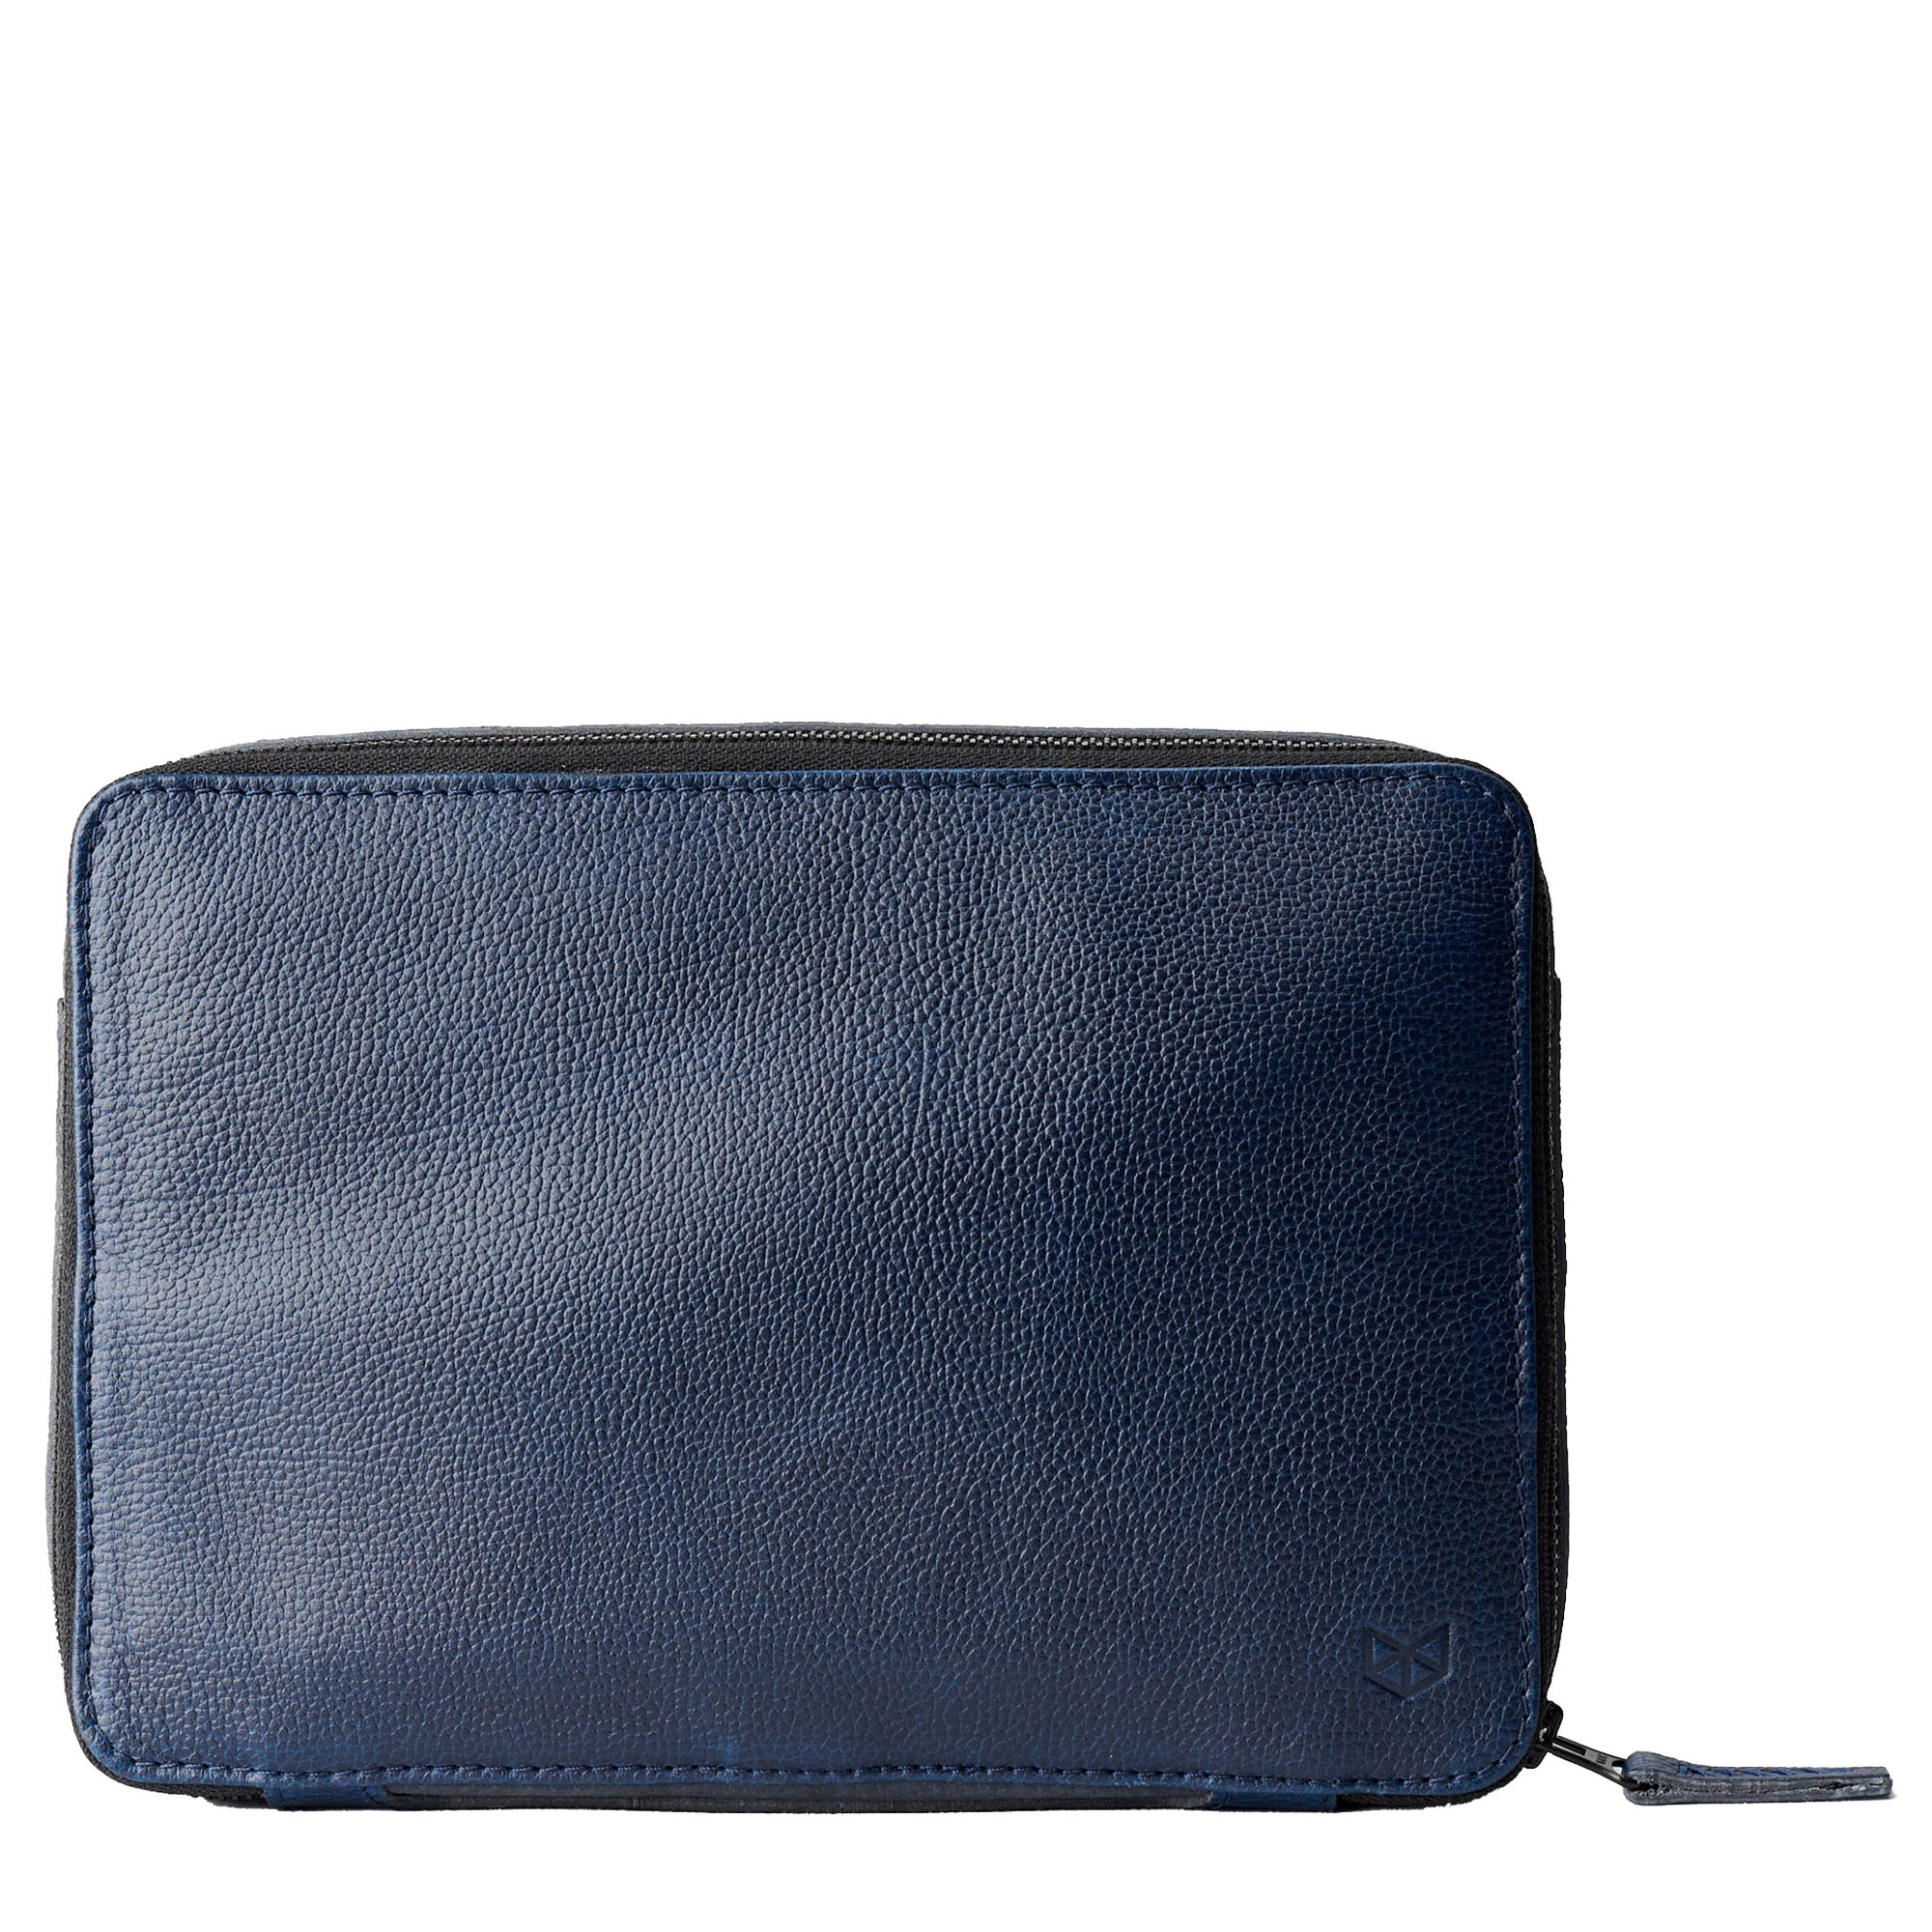 Navy tech pouch by Capra Leather. Small EDC bags. Fits iPad Pro with Apple pencil